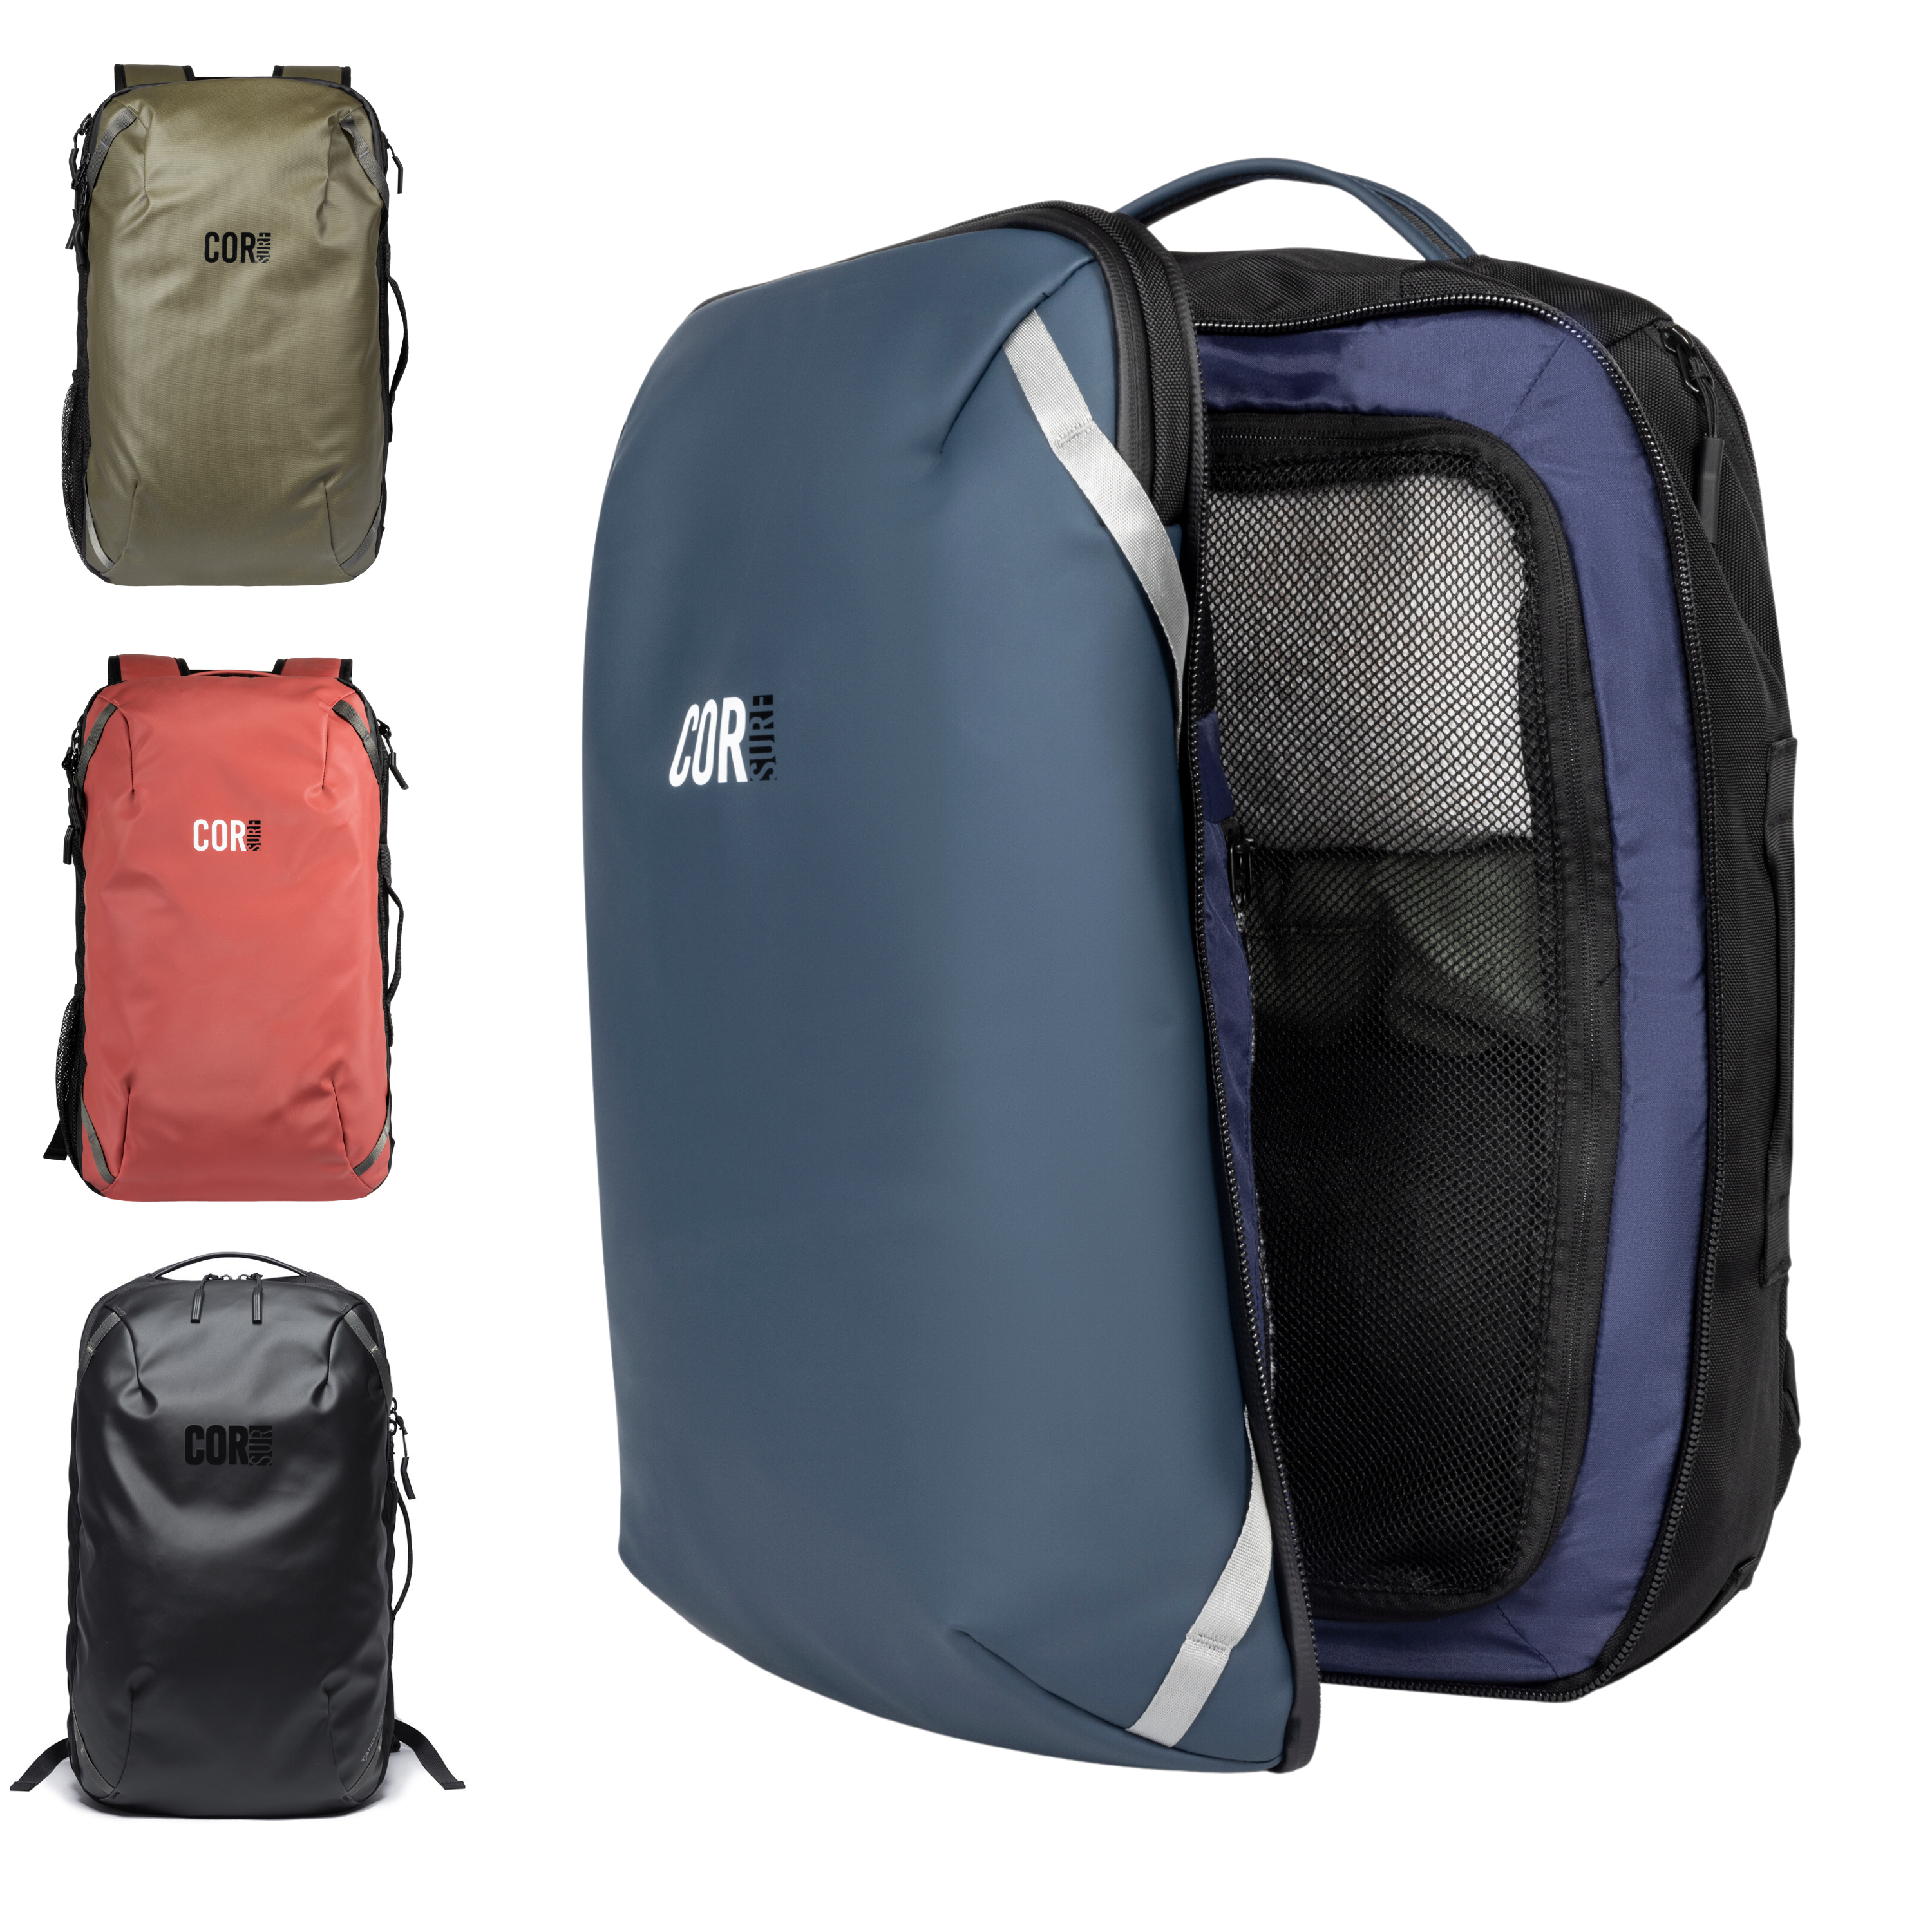 New! The Island Hopper Travel Backpack 40L, Midnight Blue